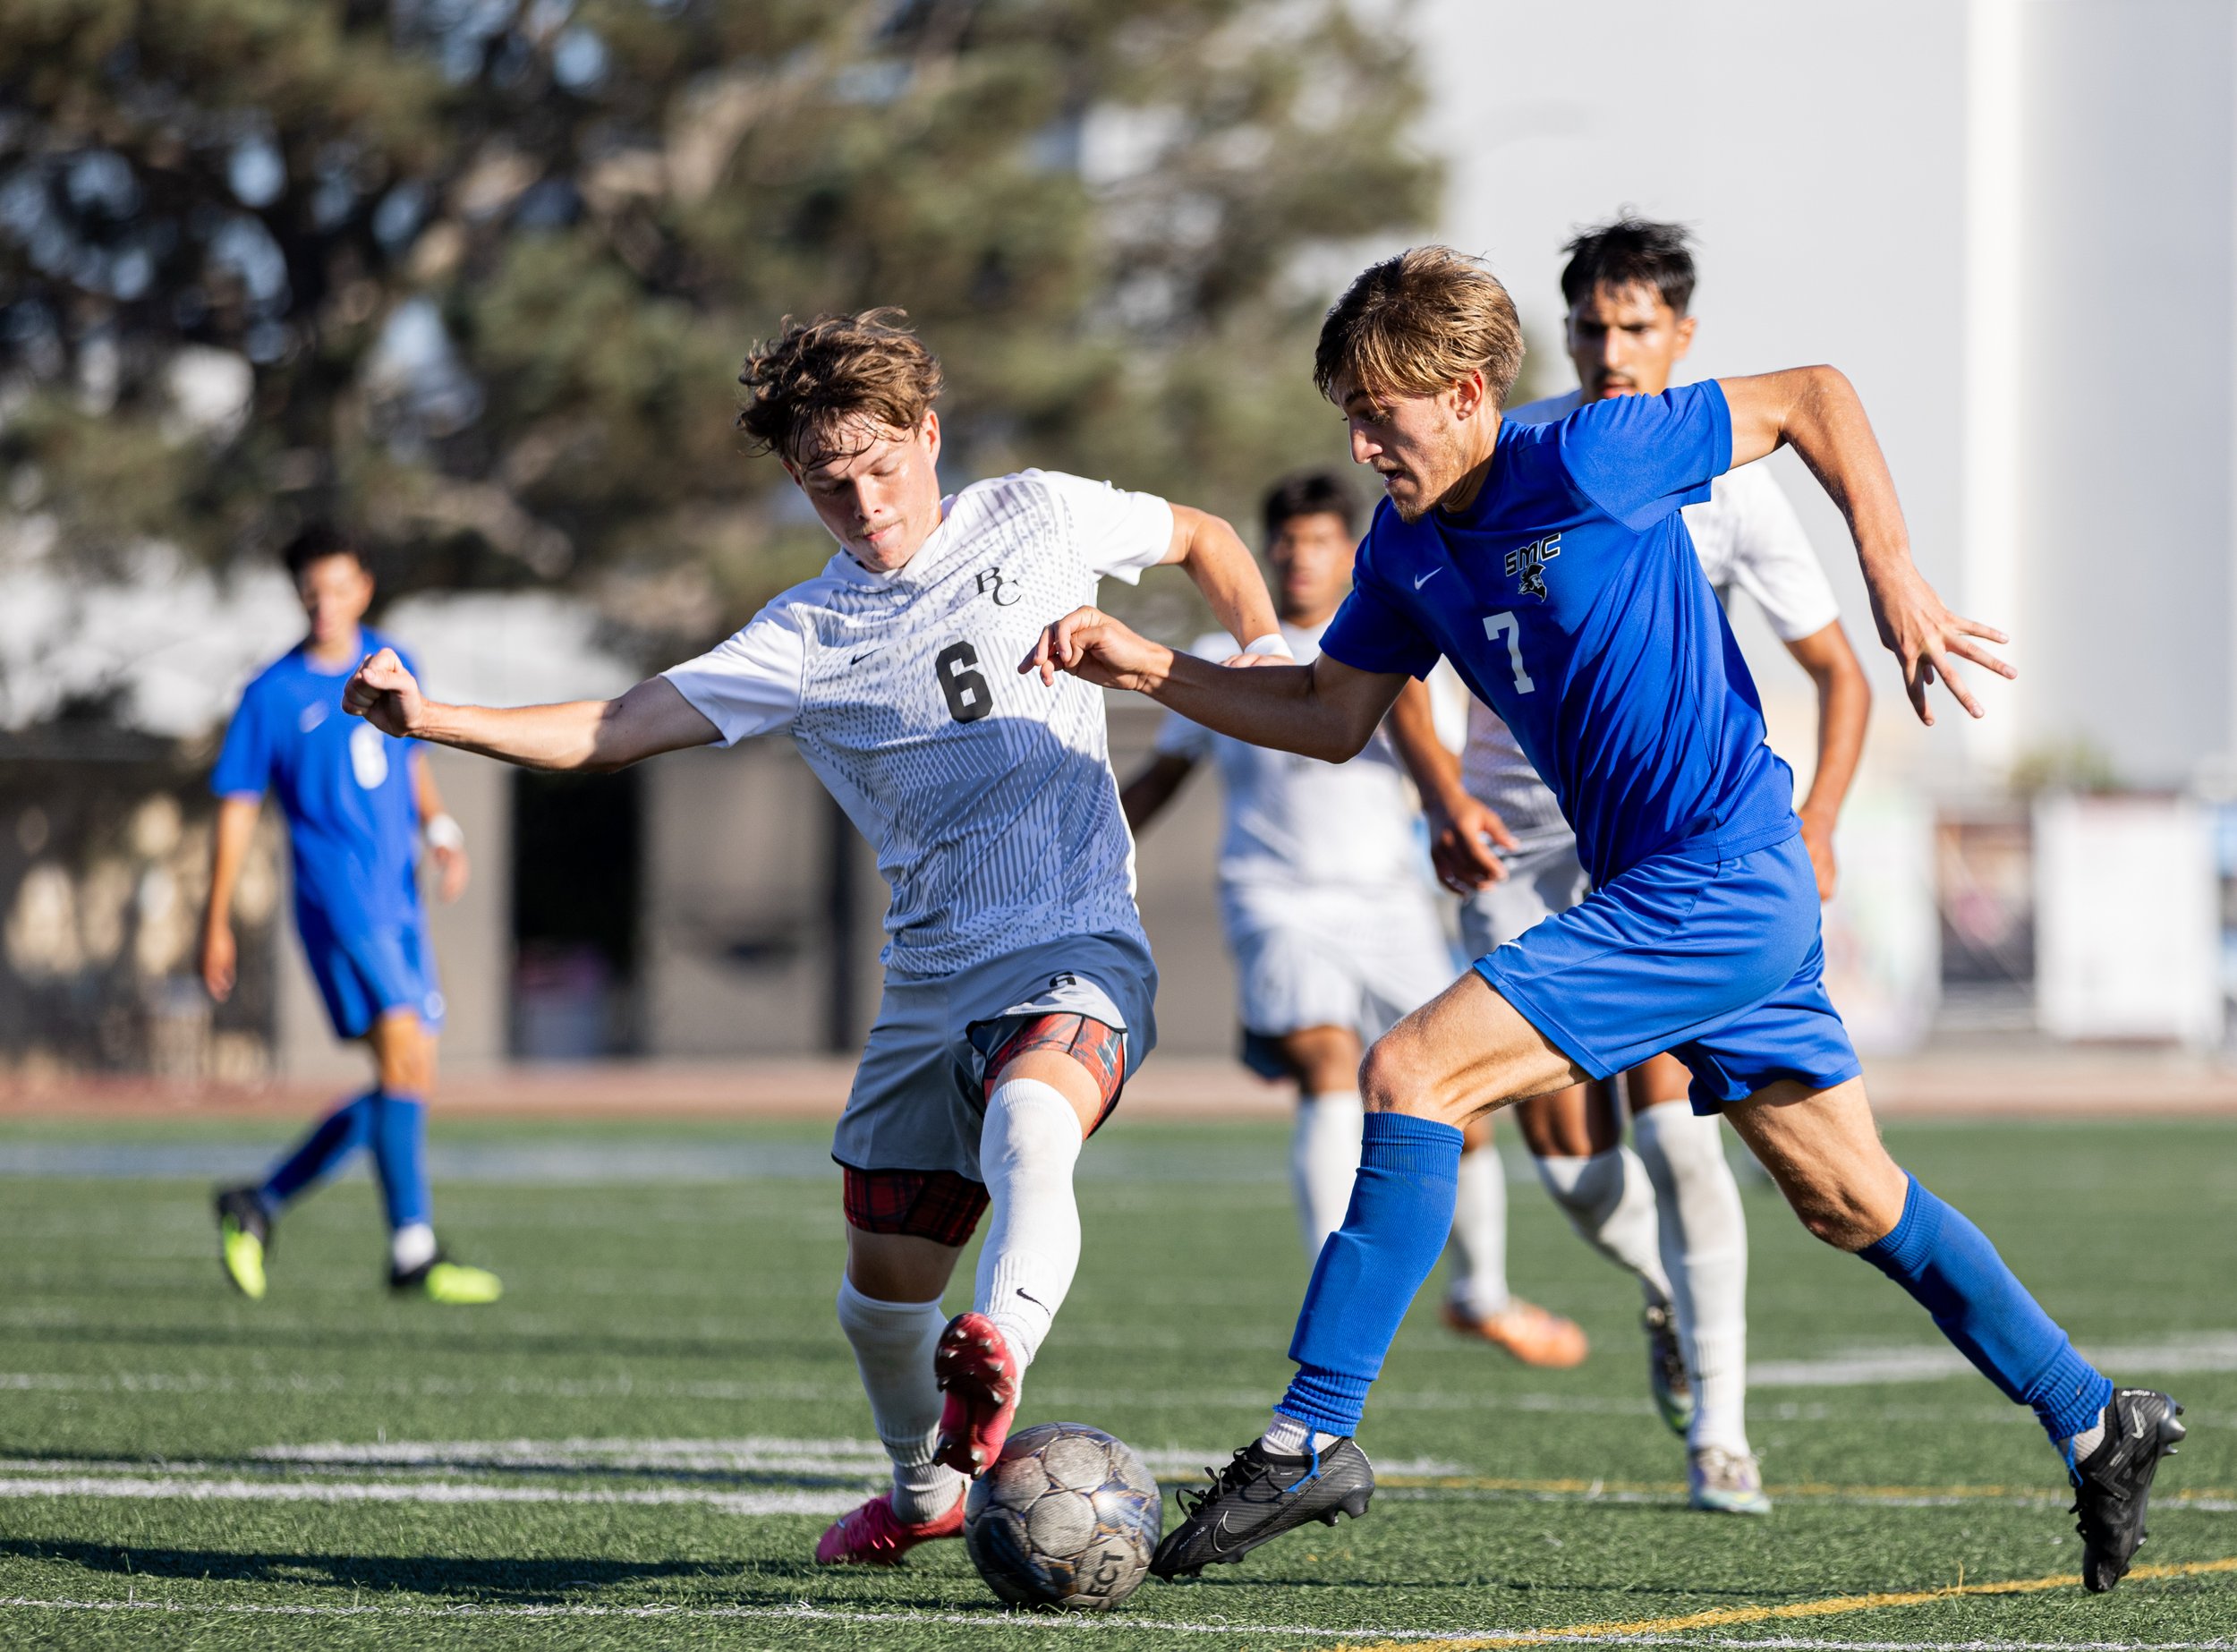  Santa Monica College(SMC) men's soccer forward Darren Lewis(7) being pocketed by Bakersfield Renegade defender Griffin Thompson(6) on Tues, Oct. 3. SMC would go and shutout the Renegades with a score of 3-0 at Corsair Field in Santa Monica, Calif. (